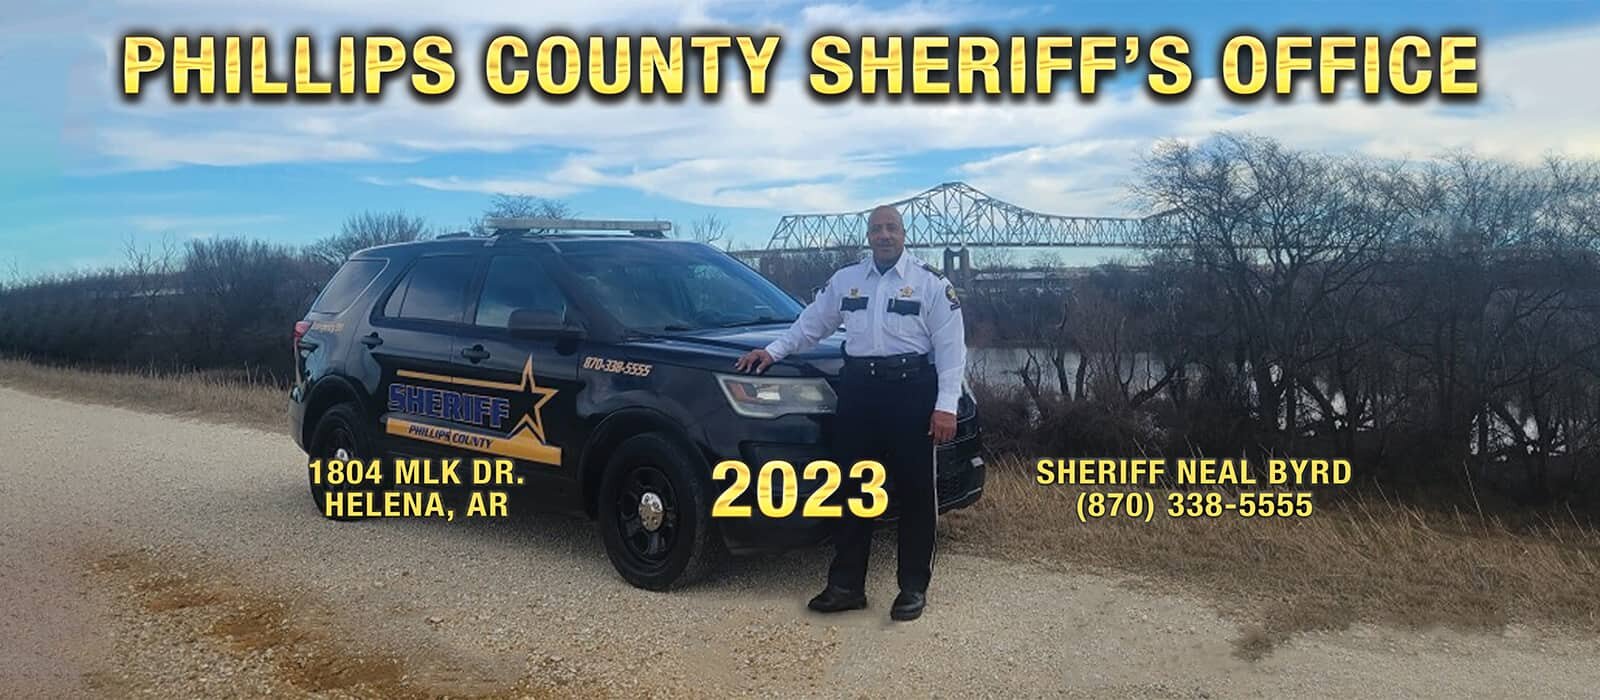 Sheriff Neal Byrd standing in front of Sheriff's Office Vehicle